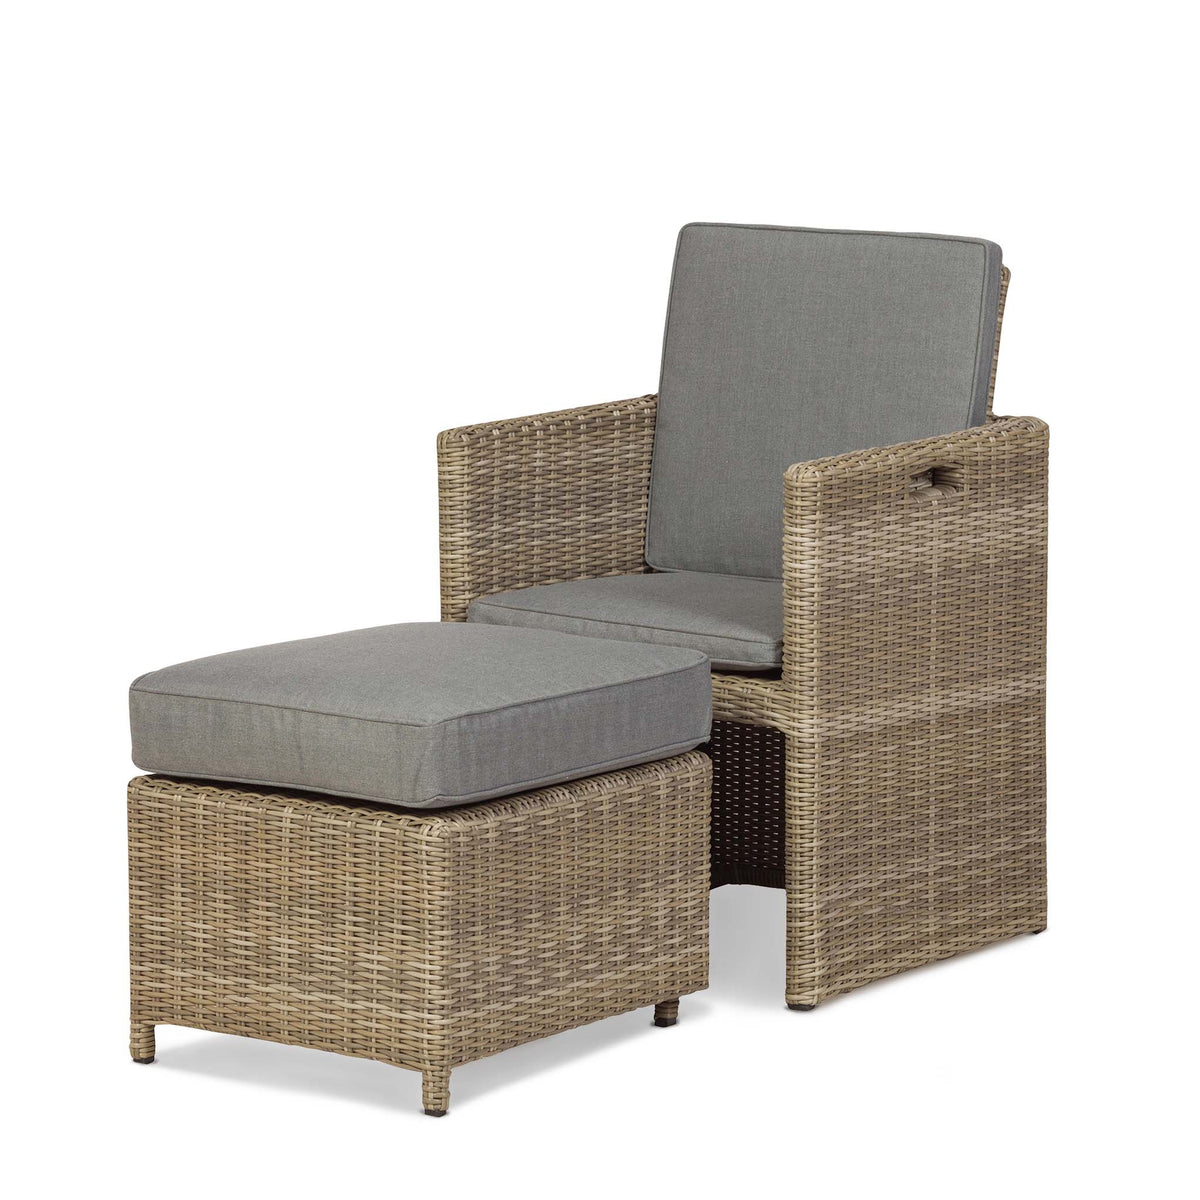 Wentworth 8 Seat Deluxe Rattan Cube Garden Dining Set - Chair and Foot-Stool Side View